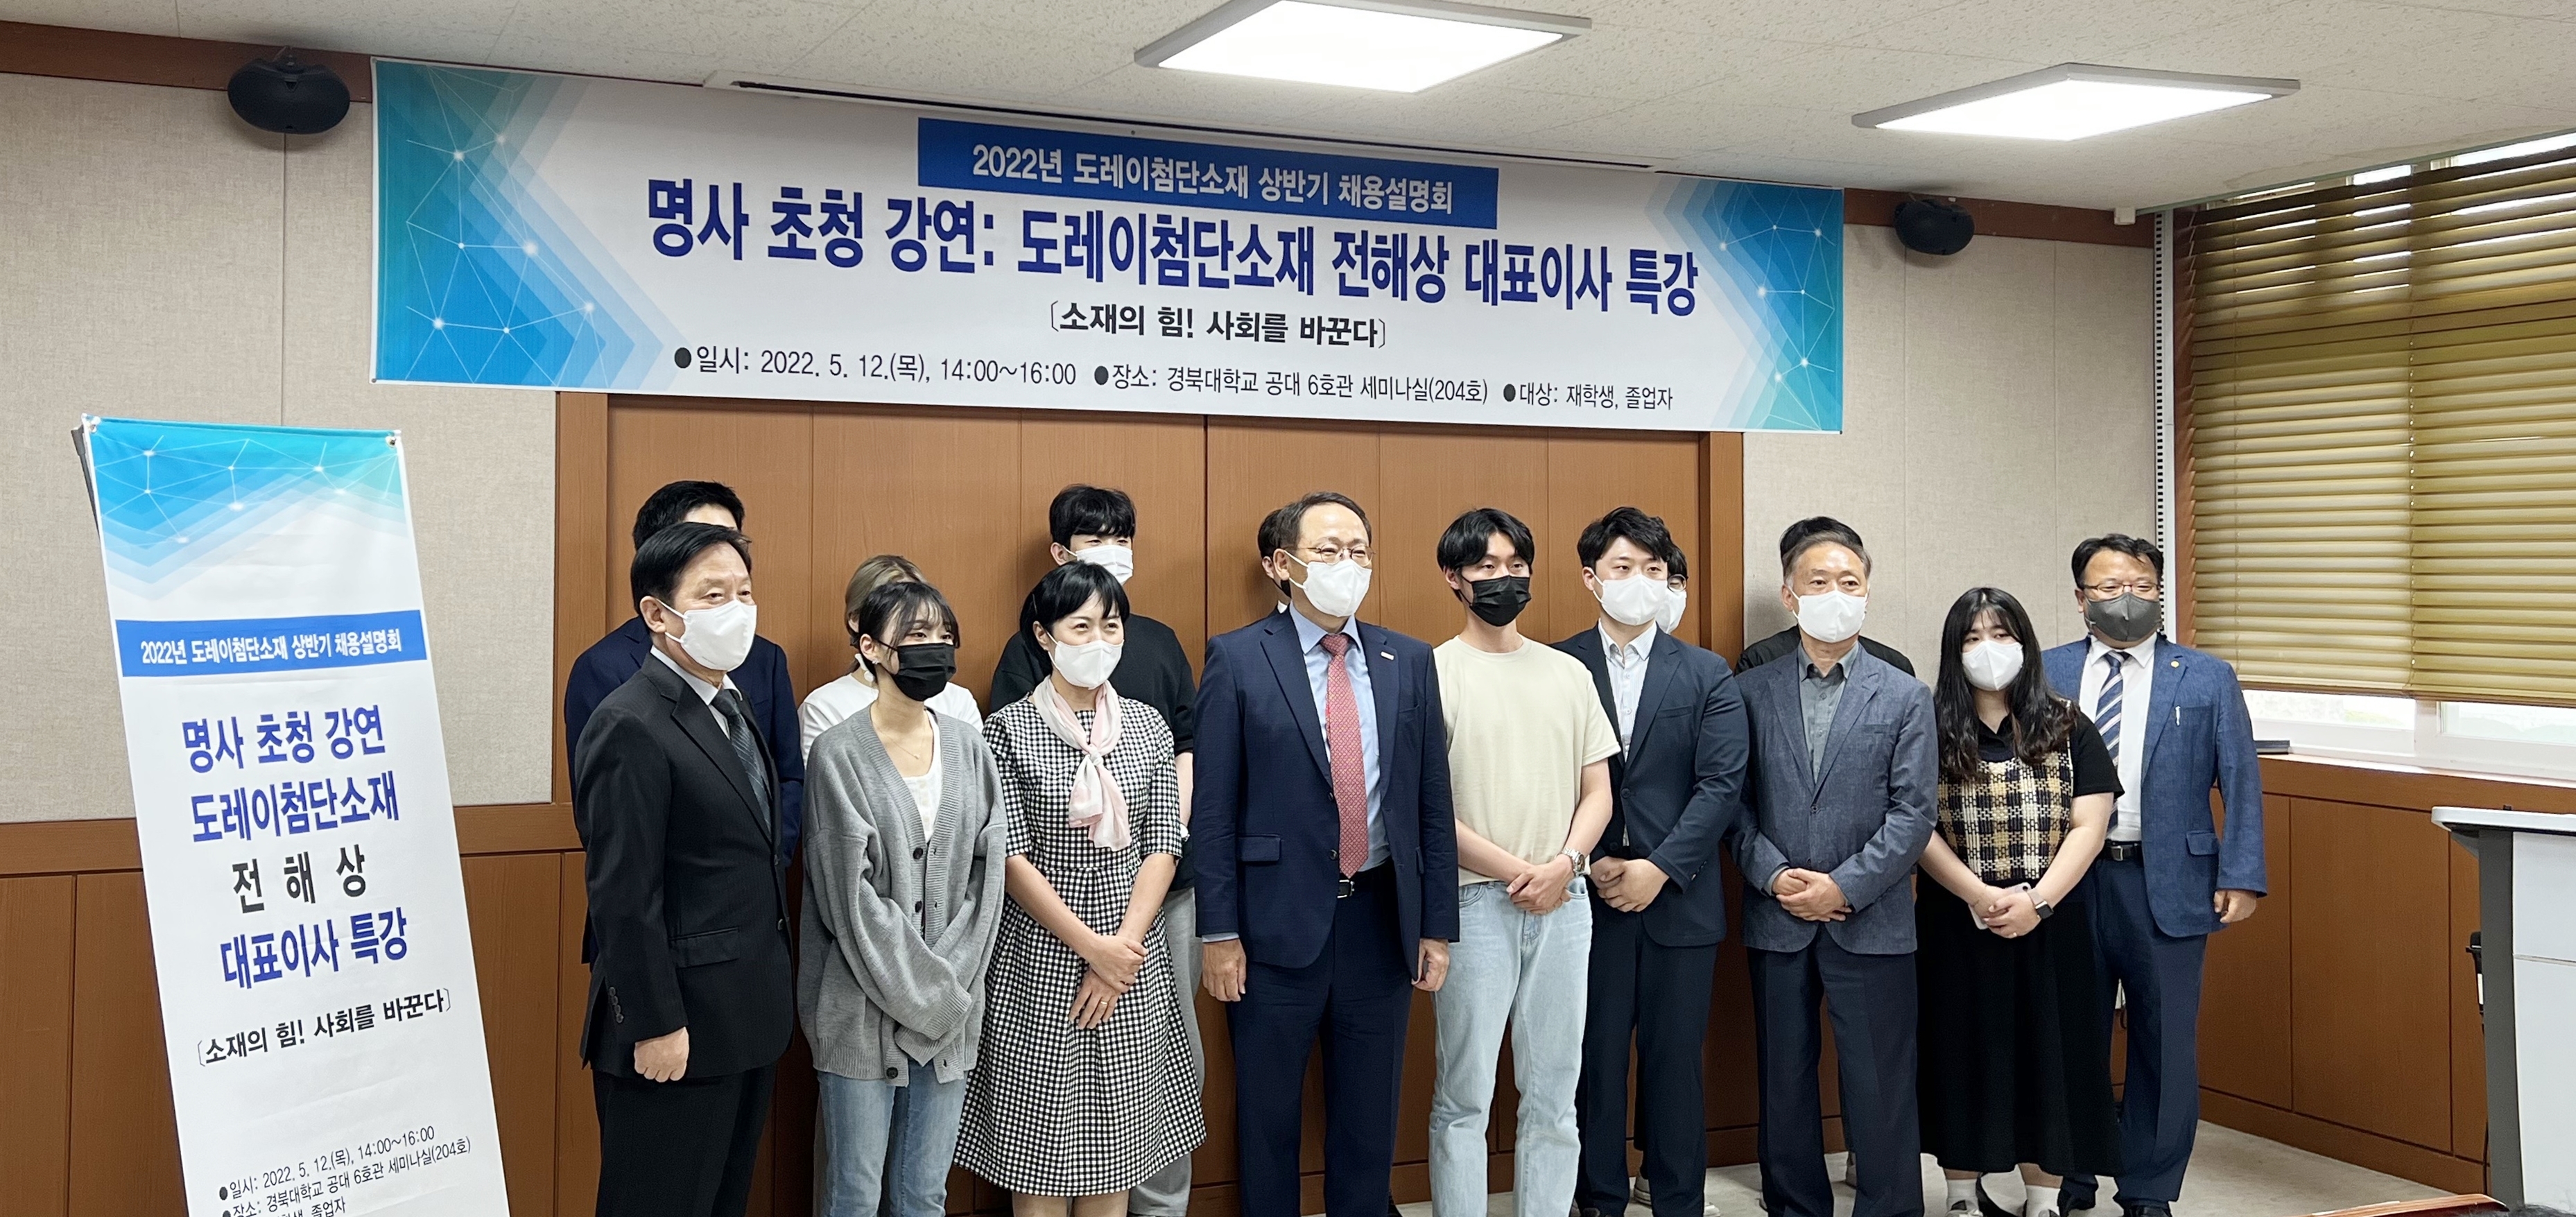 President Jeon suggests the possibility of materials that will lead the future of the chemical industry in a special lecture at Kyungpook National University